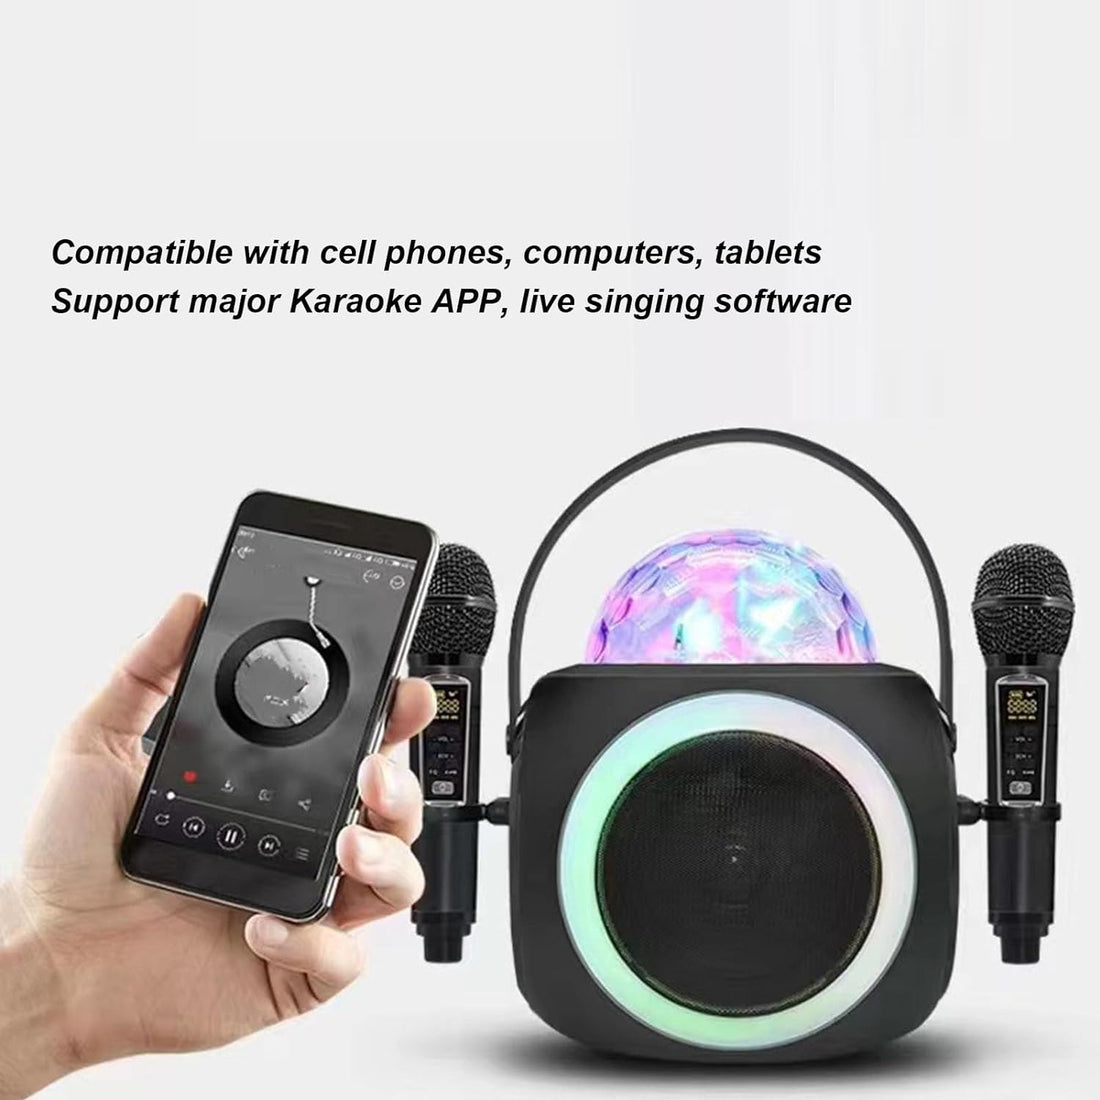 ciciglow Mini Karaoke Machine for Kids Adults, Portable Bluetooth Karaoke Speaker with 2 Wireless Microphones and LED Lights, Home Karaoke System for Home Party